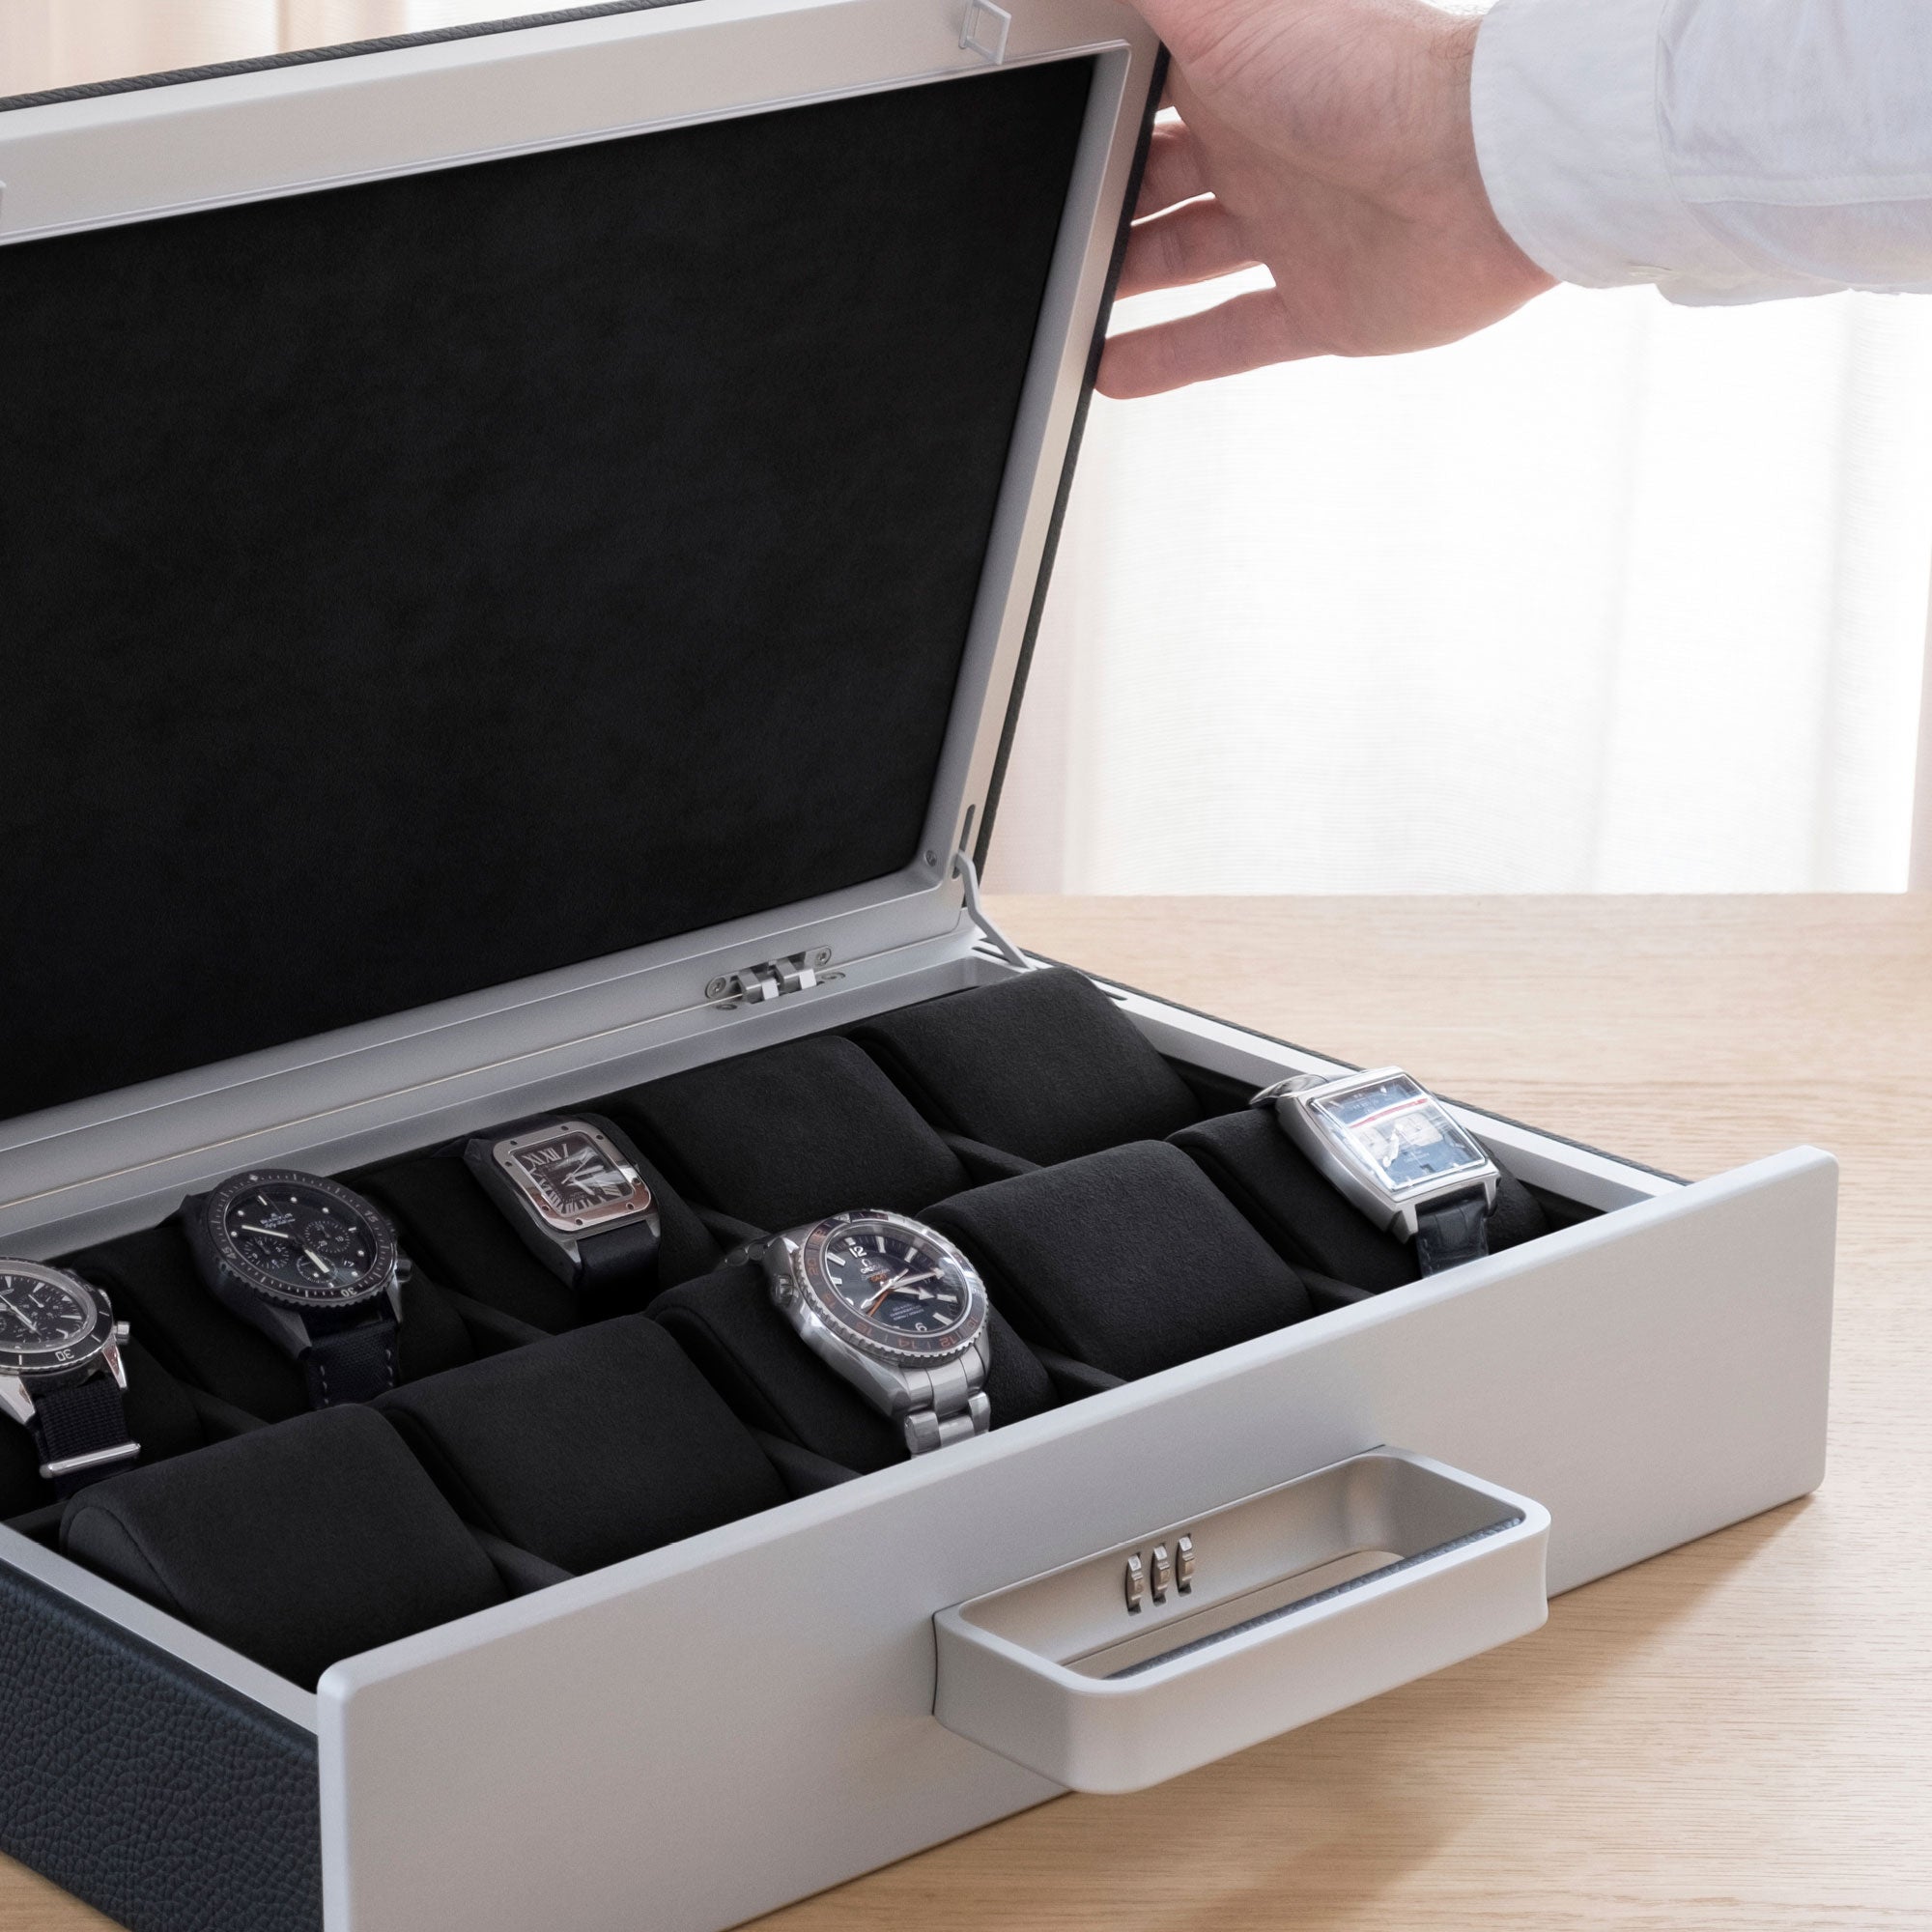 Lifestyle shot of Mackenzie Watch briefcase 10 filled with luxury watches including BlancPain, Cartier and Omega